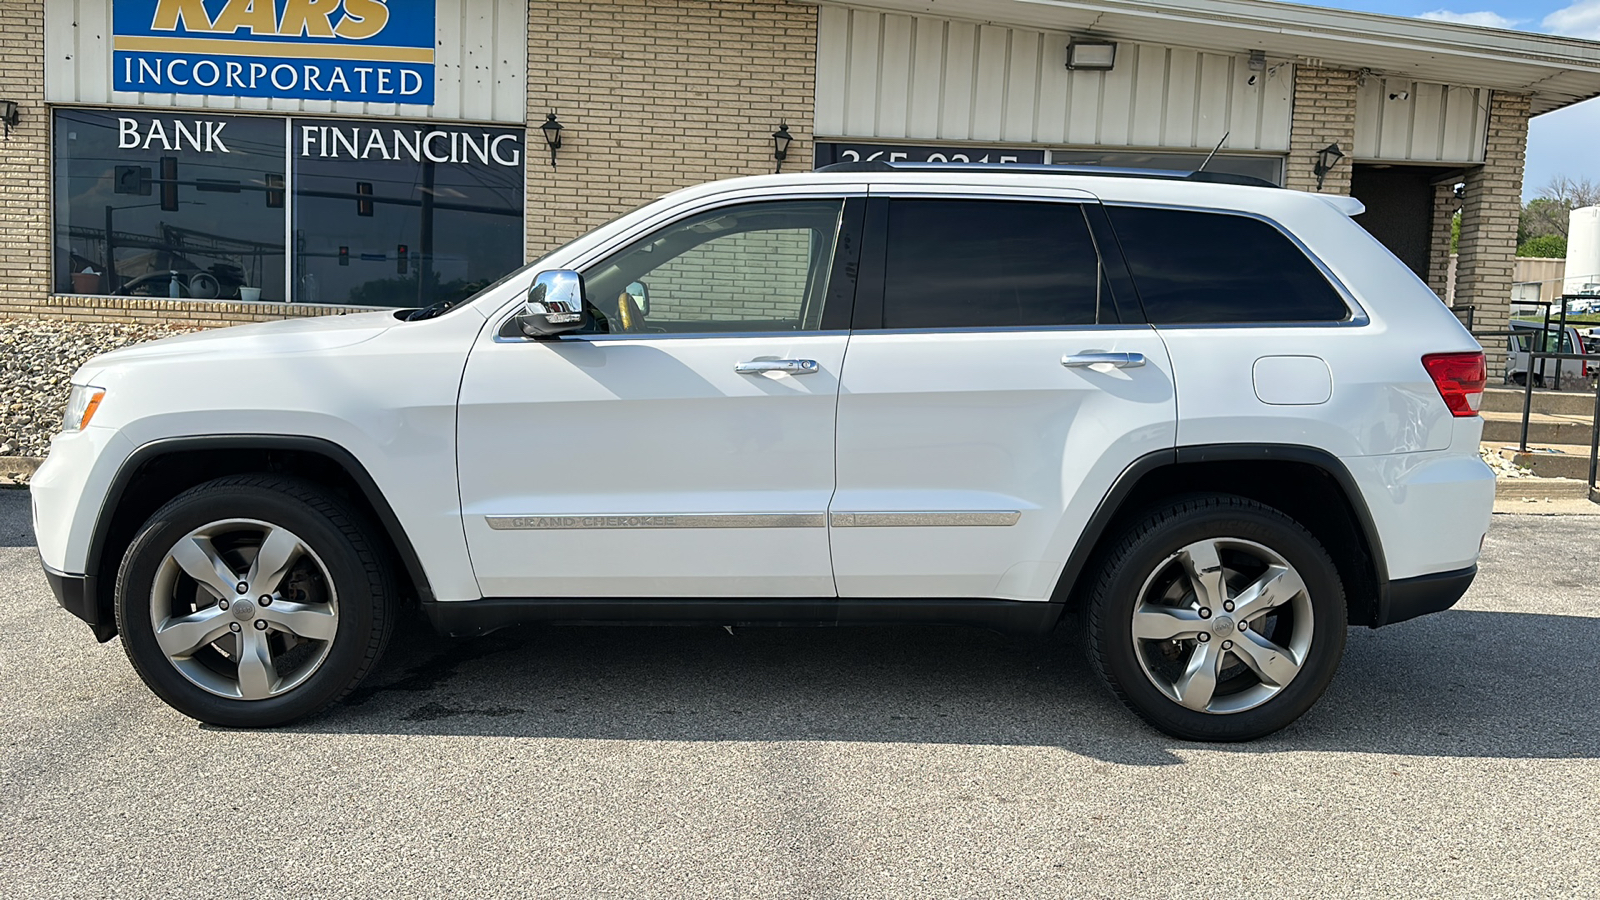 2013 Jeep Grand Cherokee OVERLAND 4WD  - D45135D  - Kars Incorporated - DSM